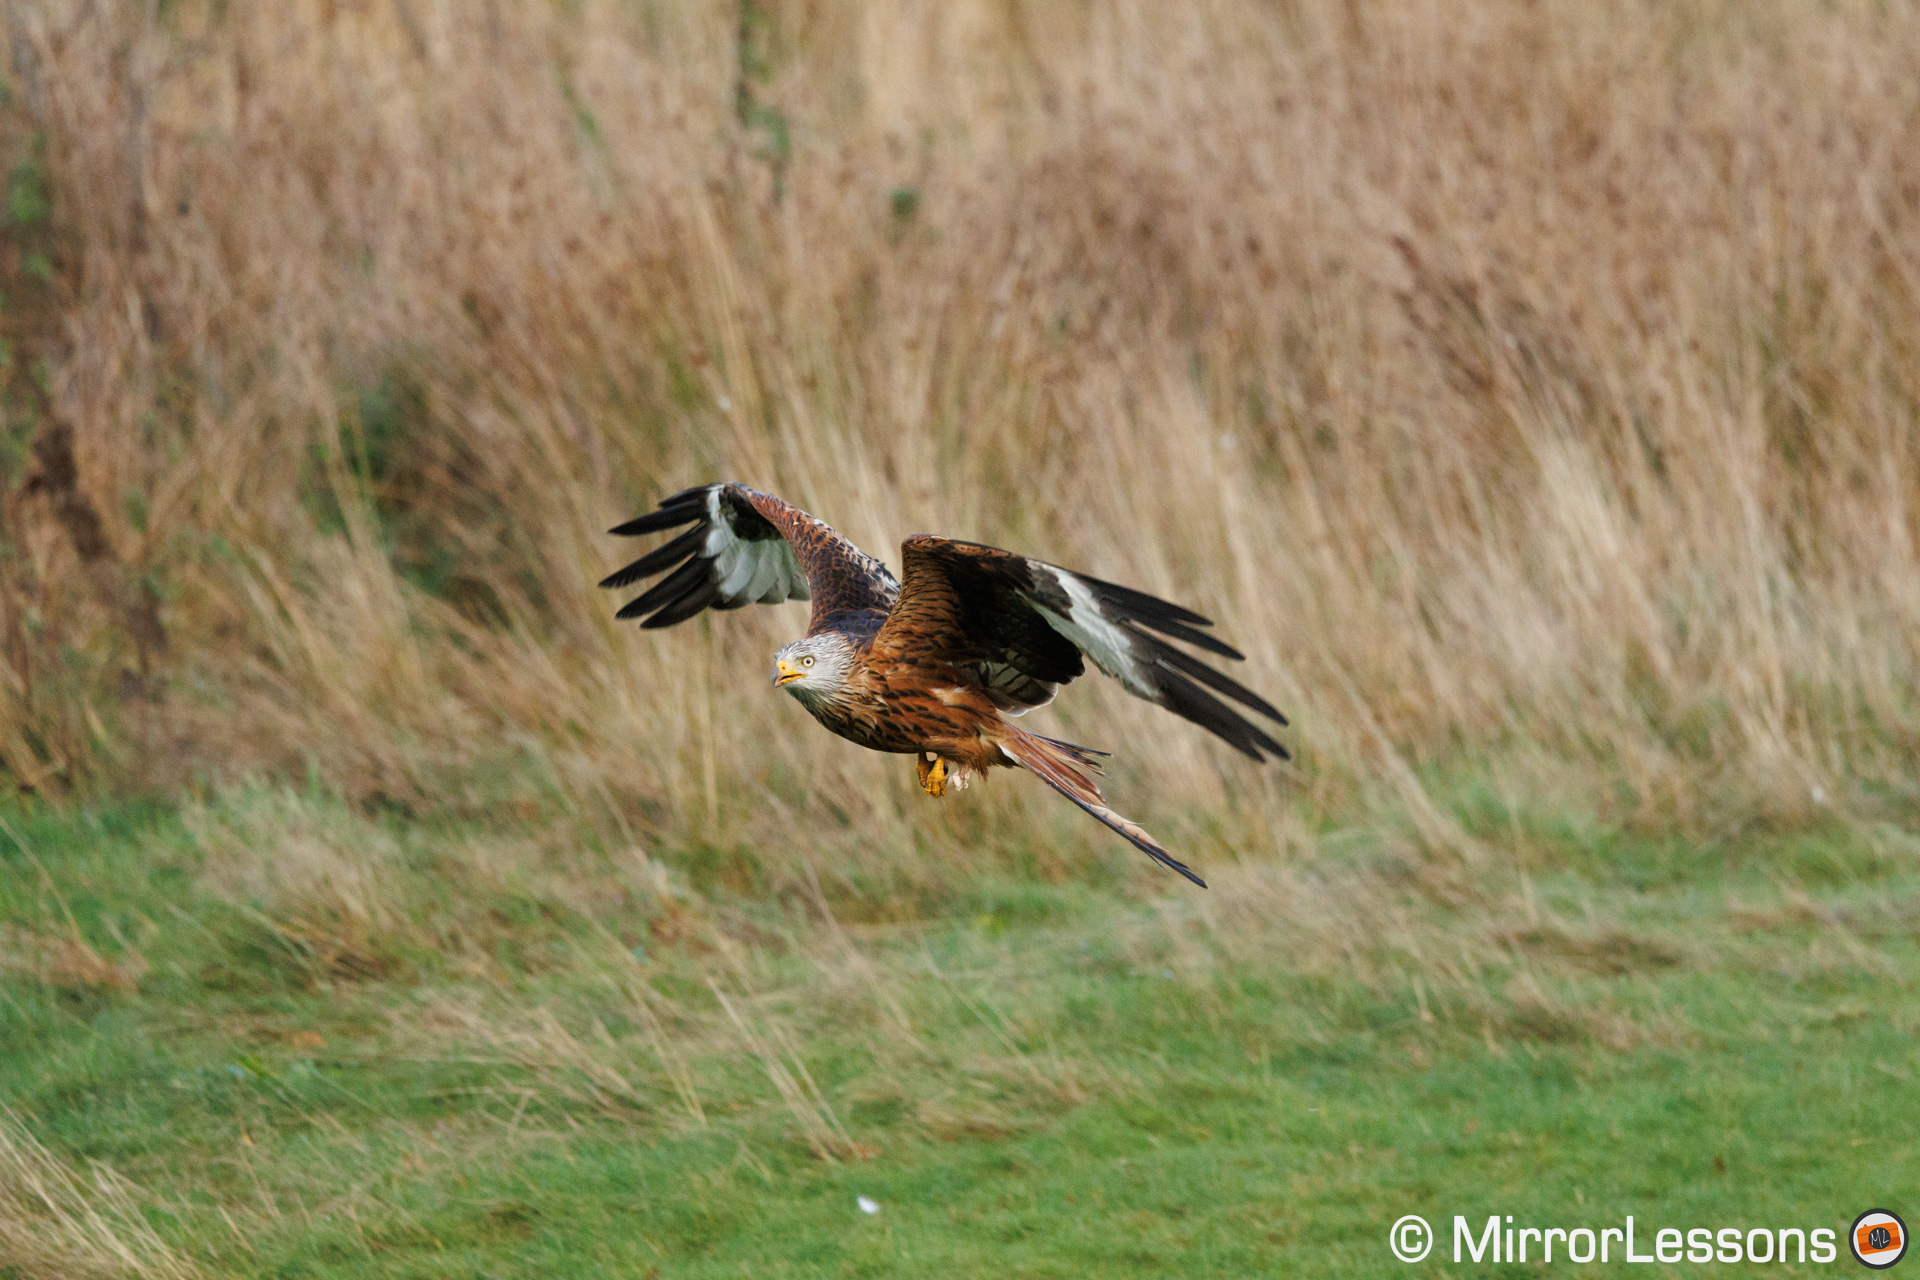 Red kite flying over a field